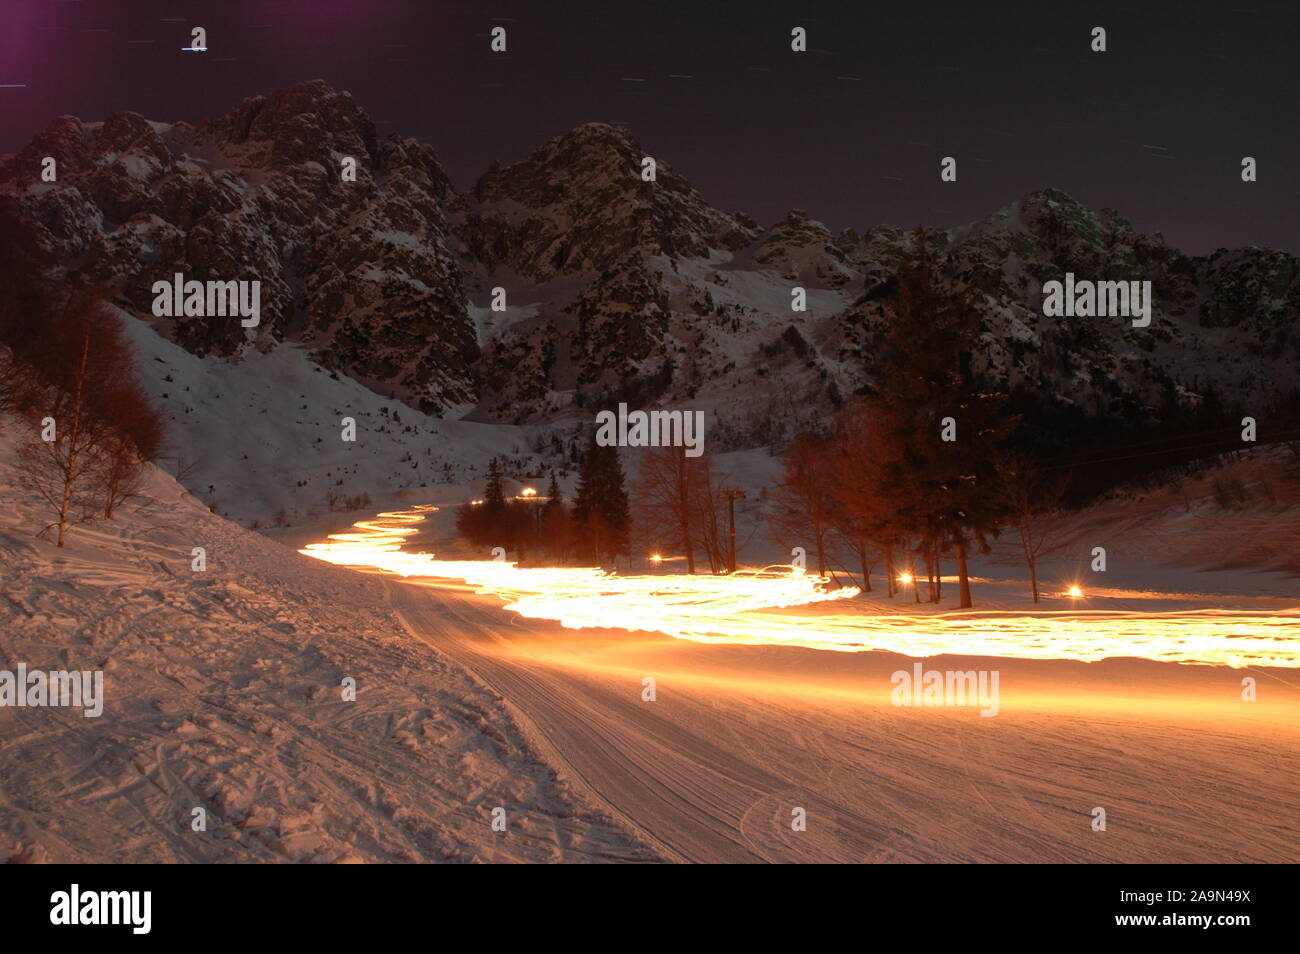 Ski at night with torches Stock Photo